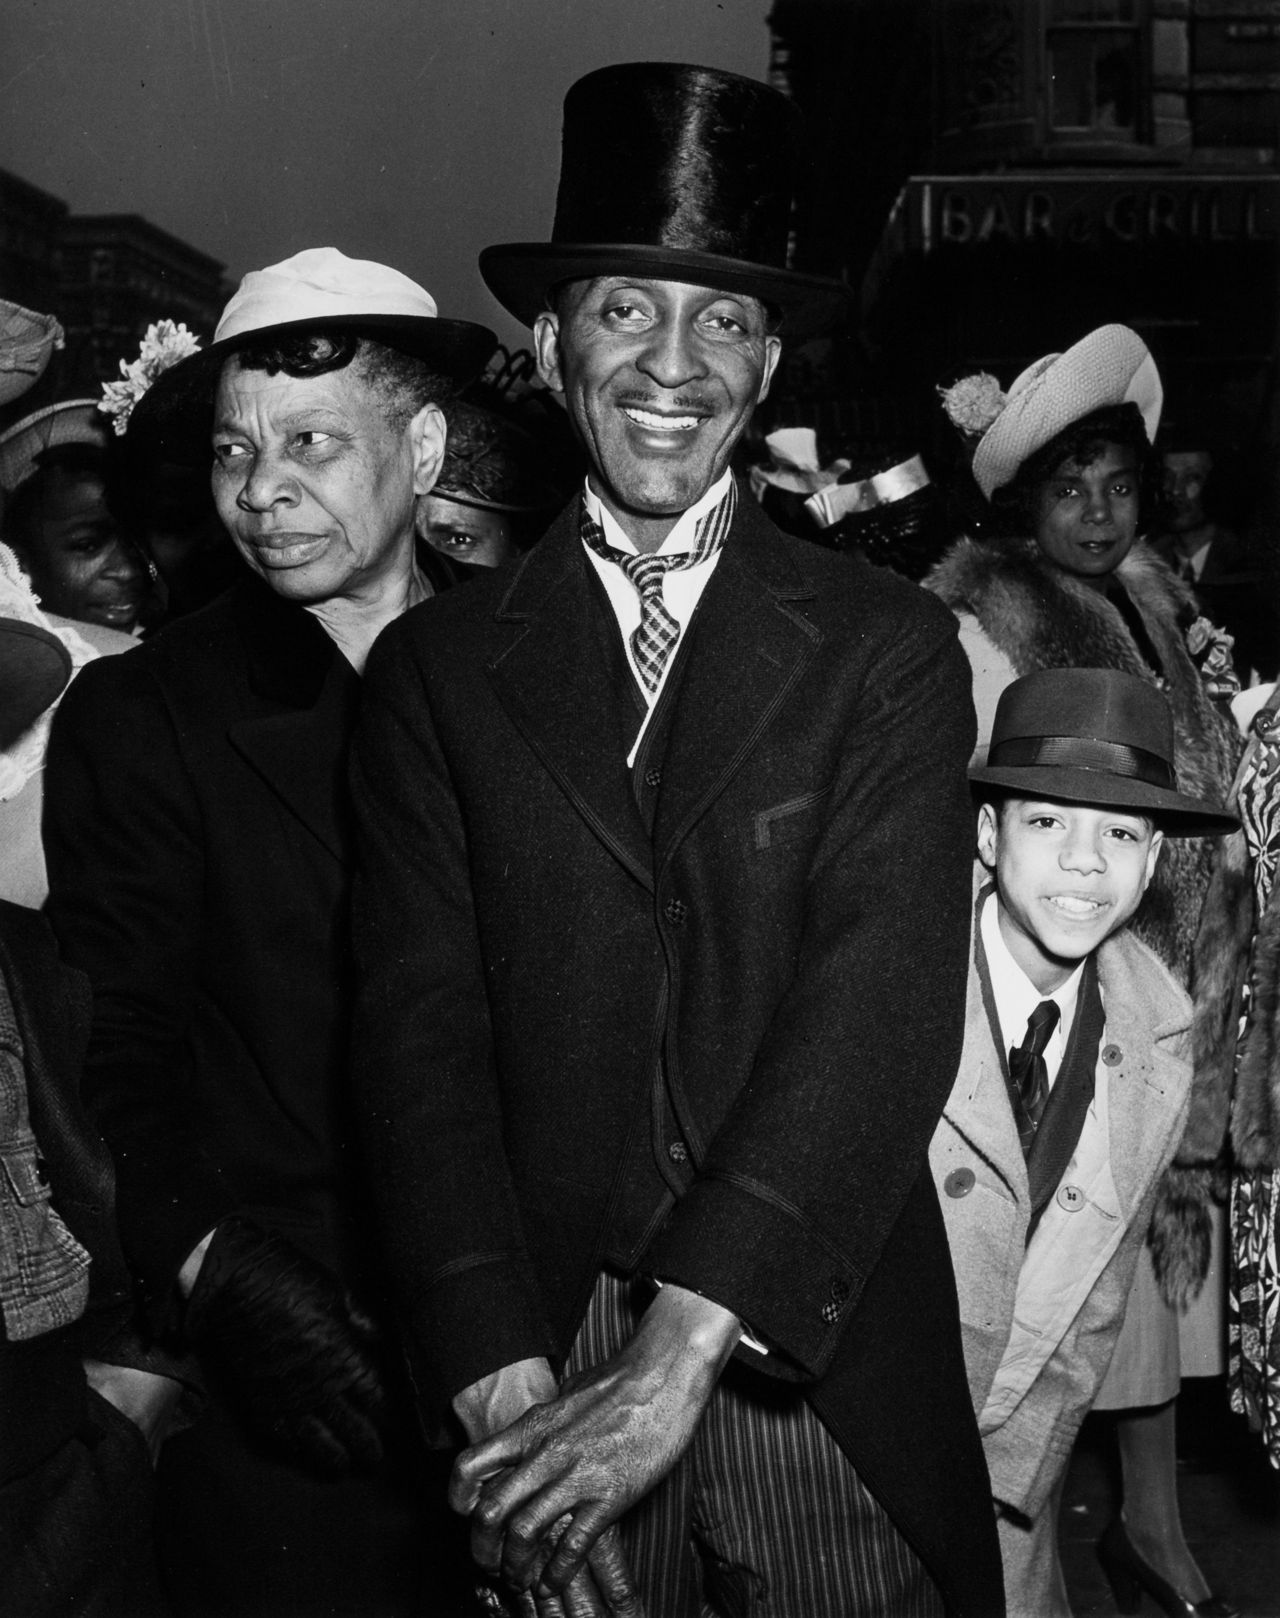  Easter Sunday, Harlem, circa 1940. Photo by Weegee.   someone tell me i&rsquo;m